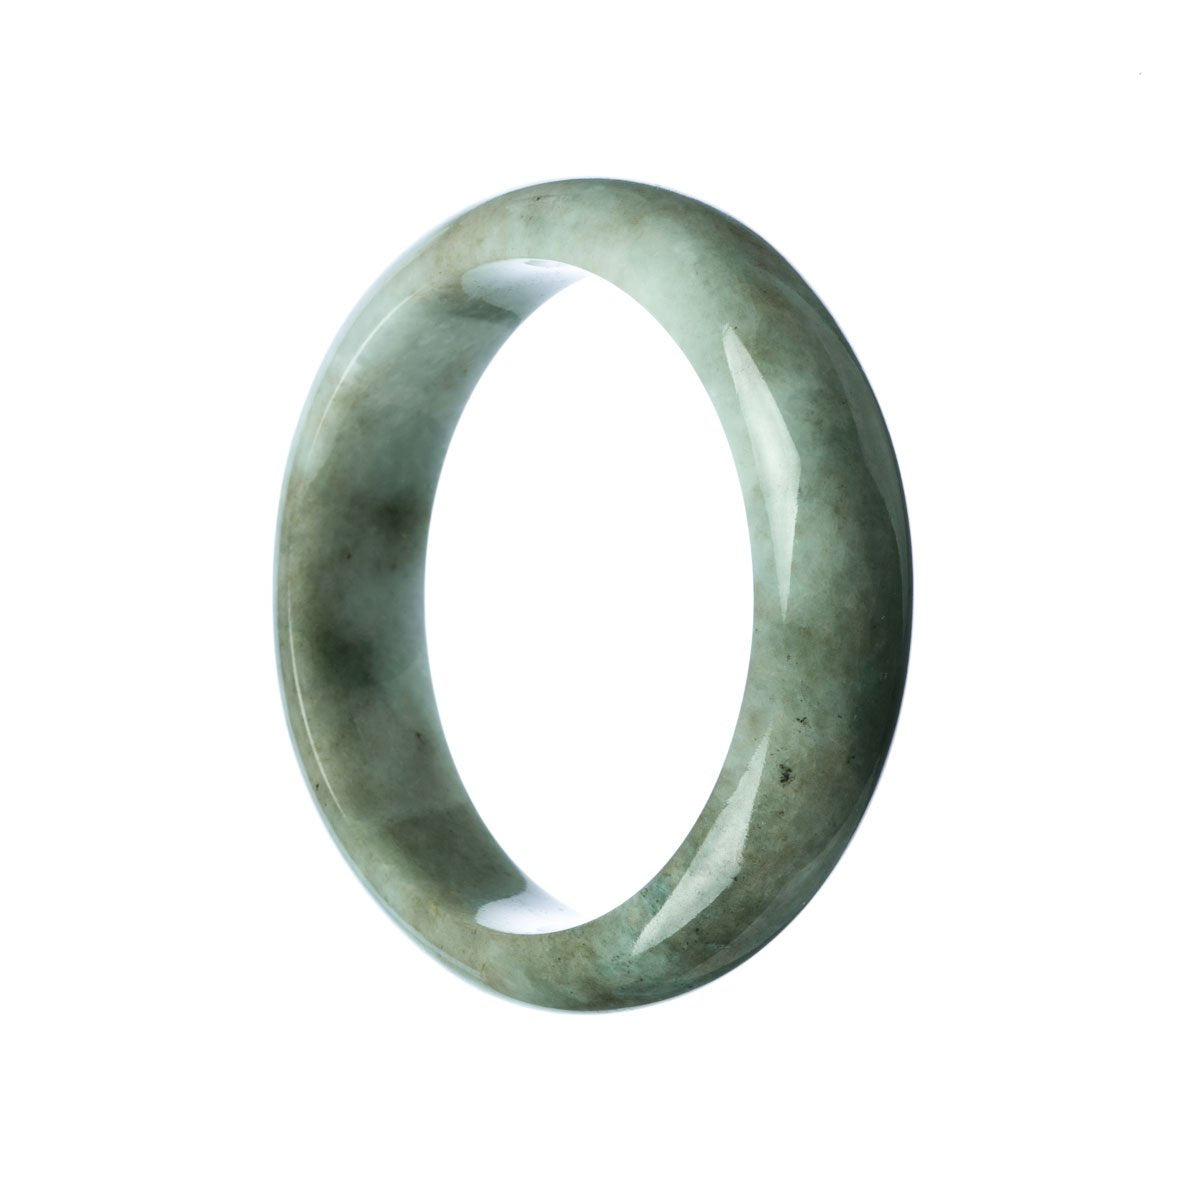 A close-up image of a green jade bangle bracelet with a half-moon shape. The bracelet is made from genuine Grade A jade and has a smooth and polished surface. It measures 59mm in diameter and is a traditional and timeless piece of jewelry.